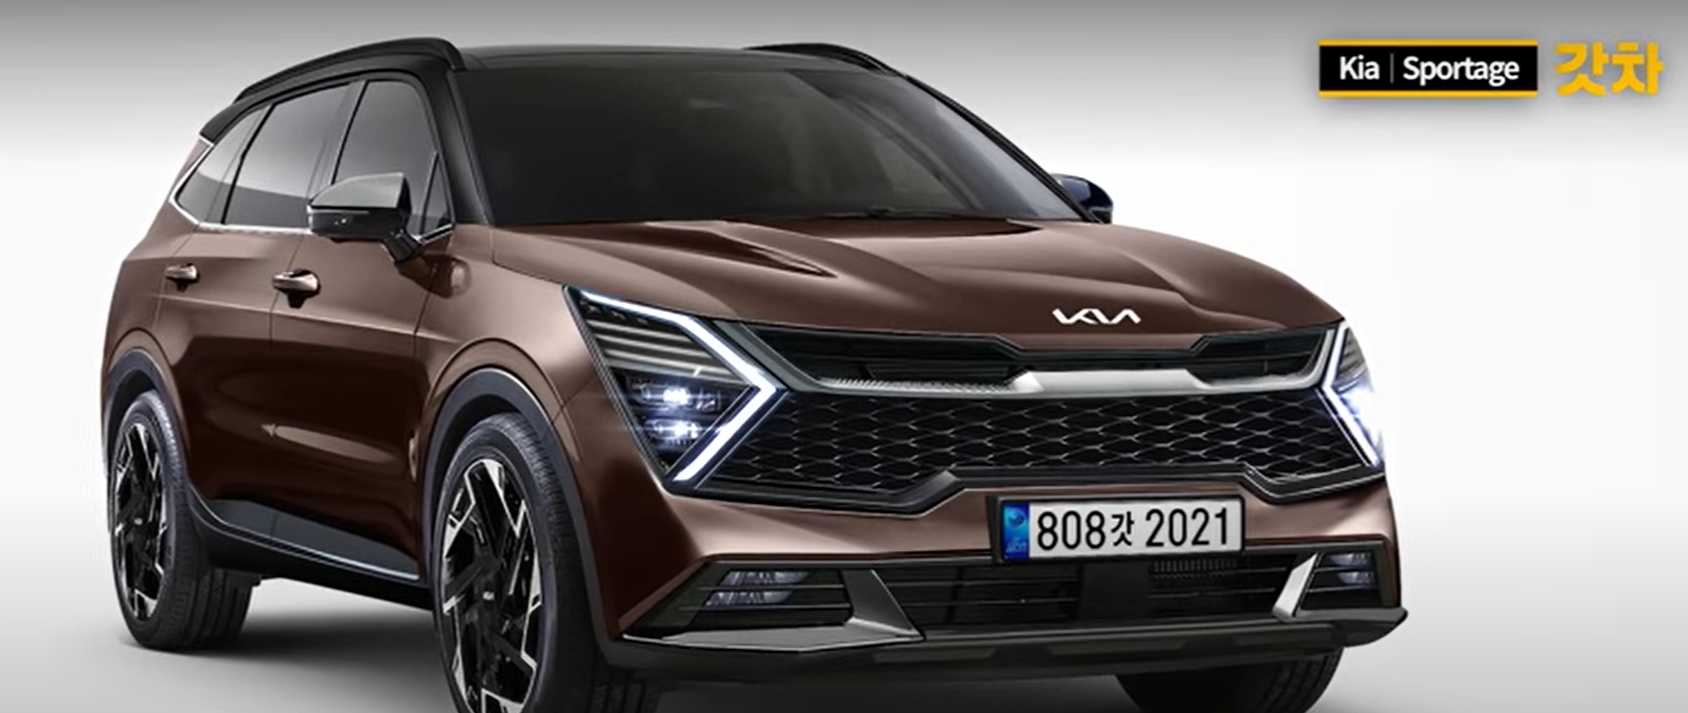 A 2022 Kia Sportage Rendering In Stunning Colors